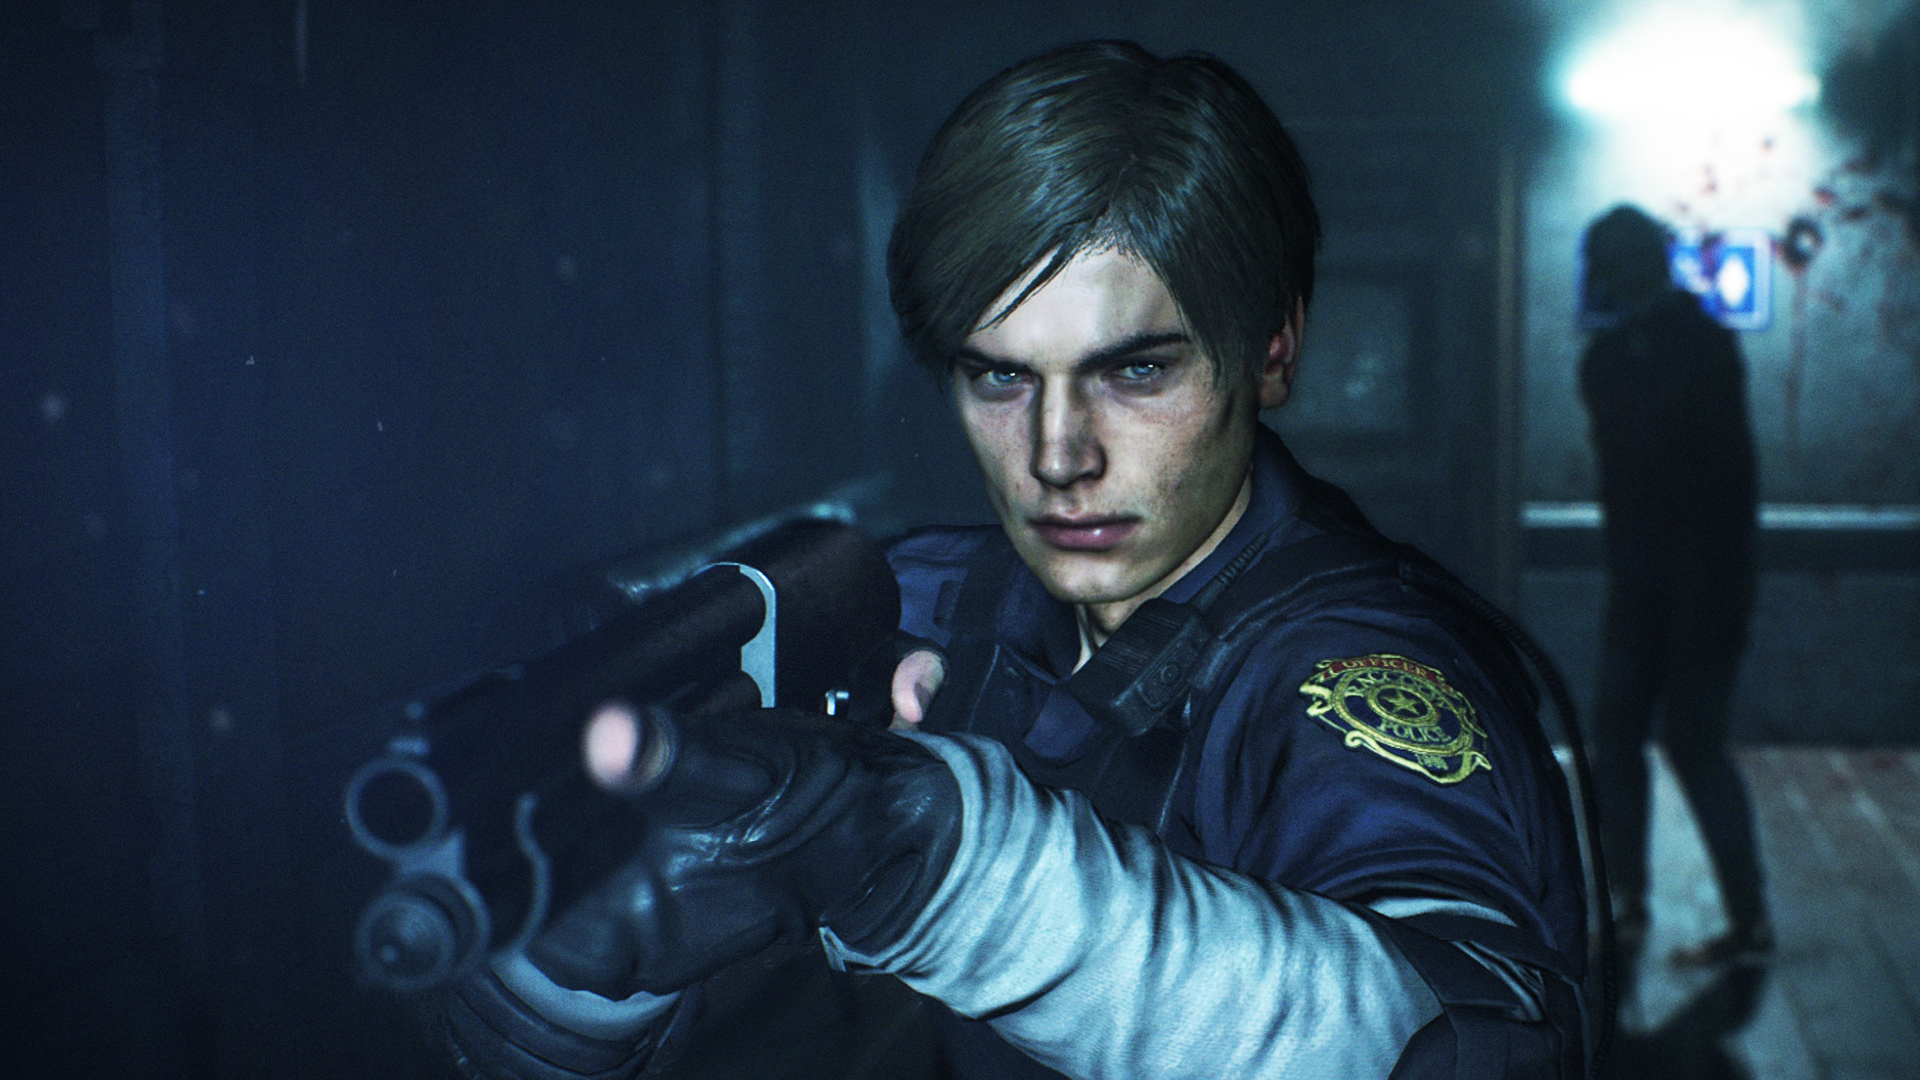 The best Resident Evil games on Nintendo Switch